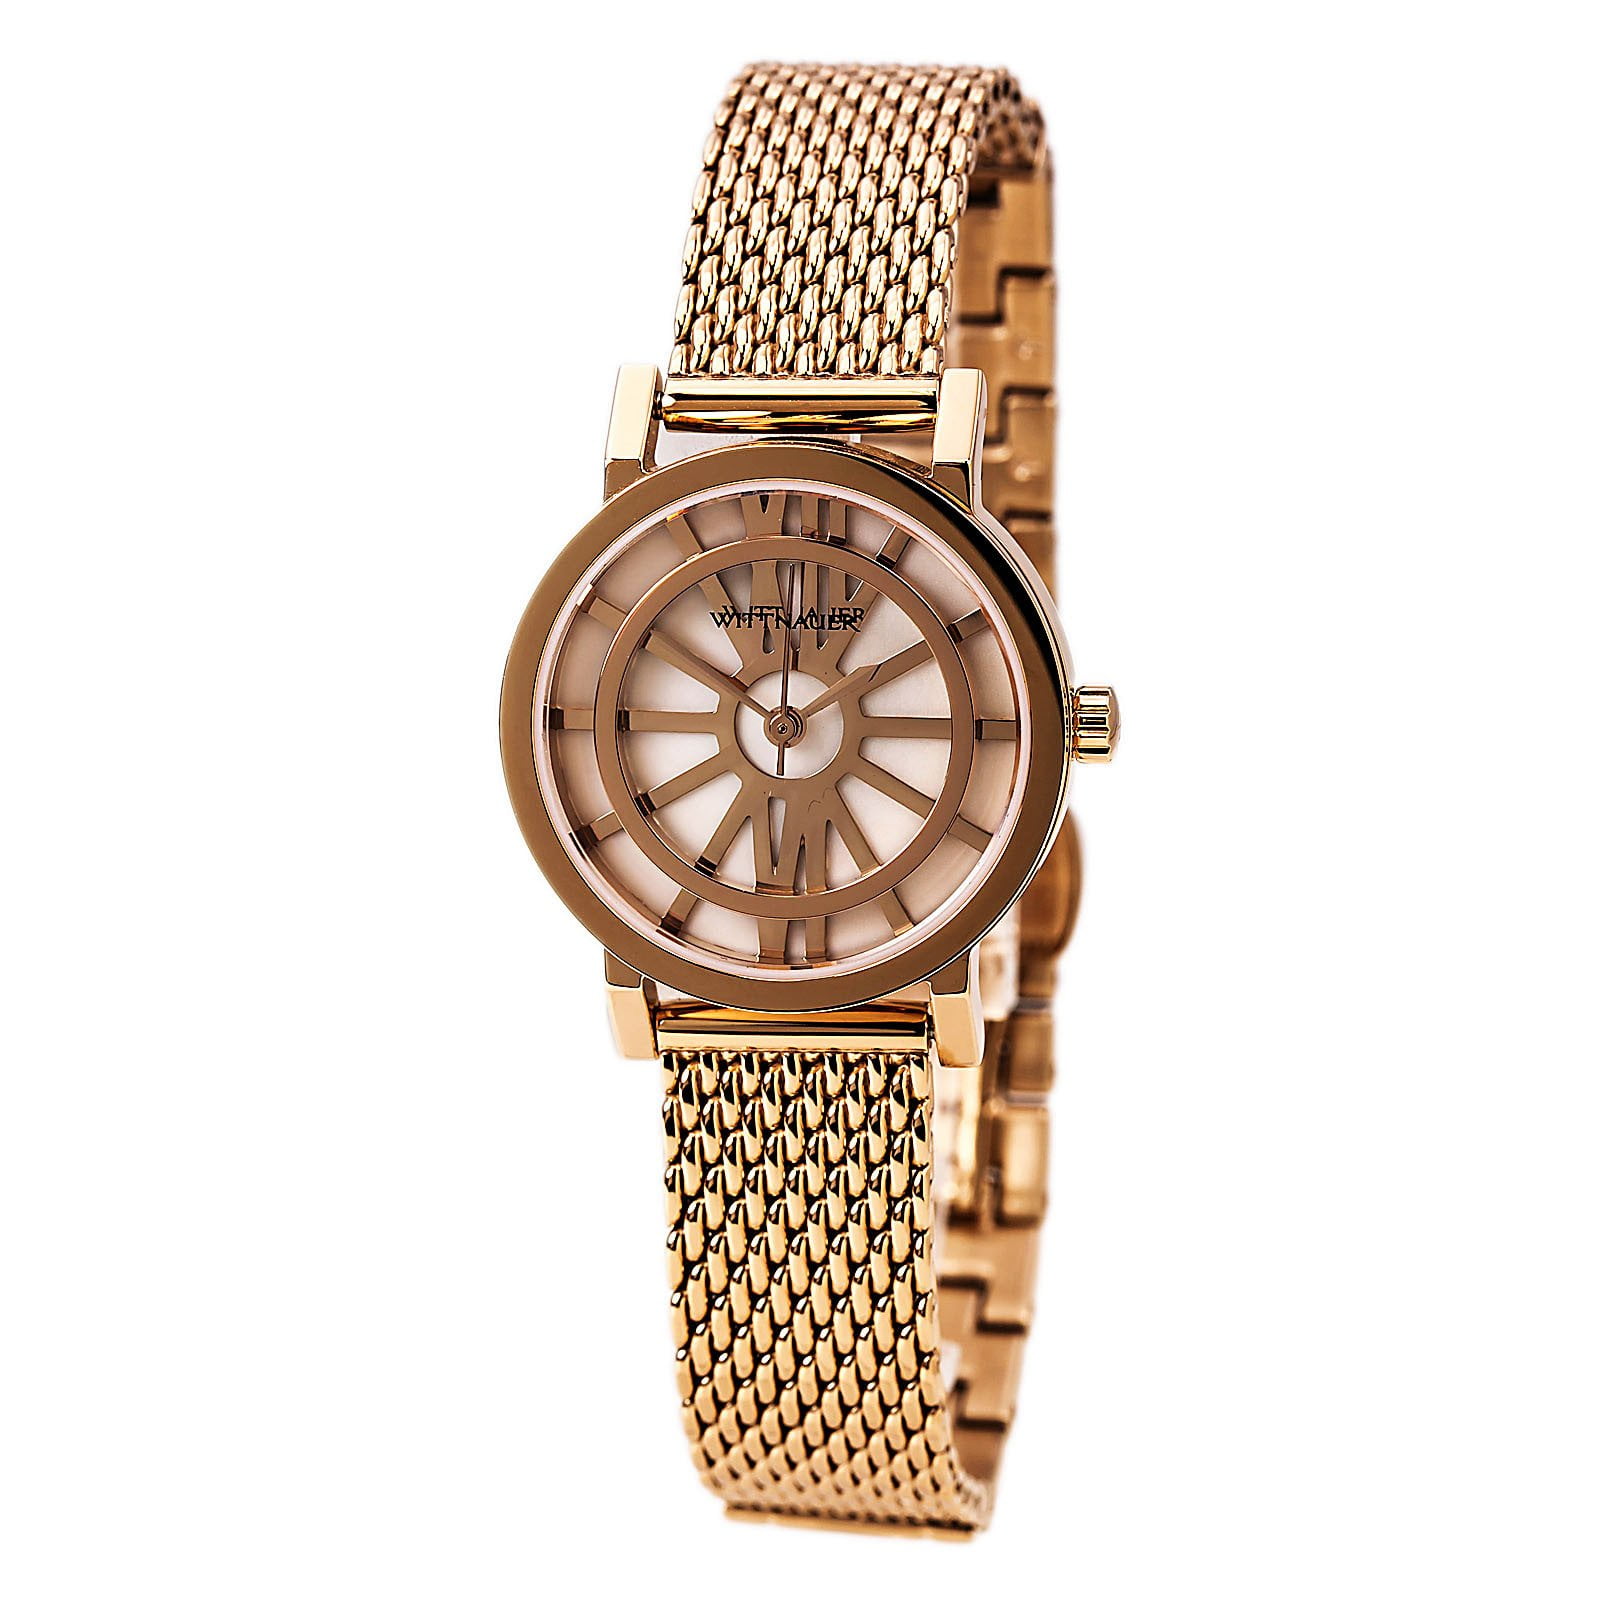 Wittnauer Women's Automatic Rose Gold-Tone Stainless Steel Watch